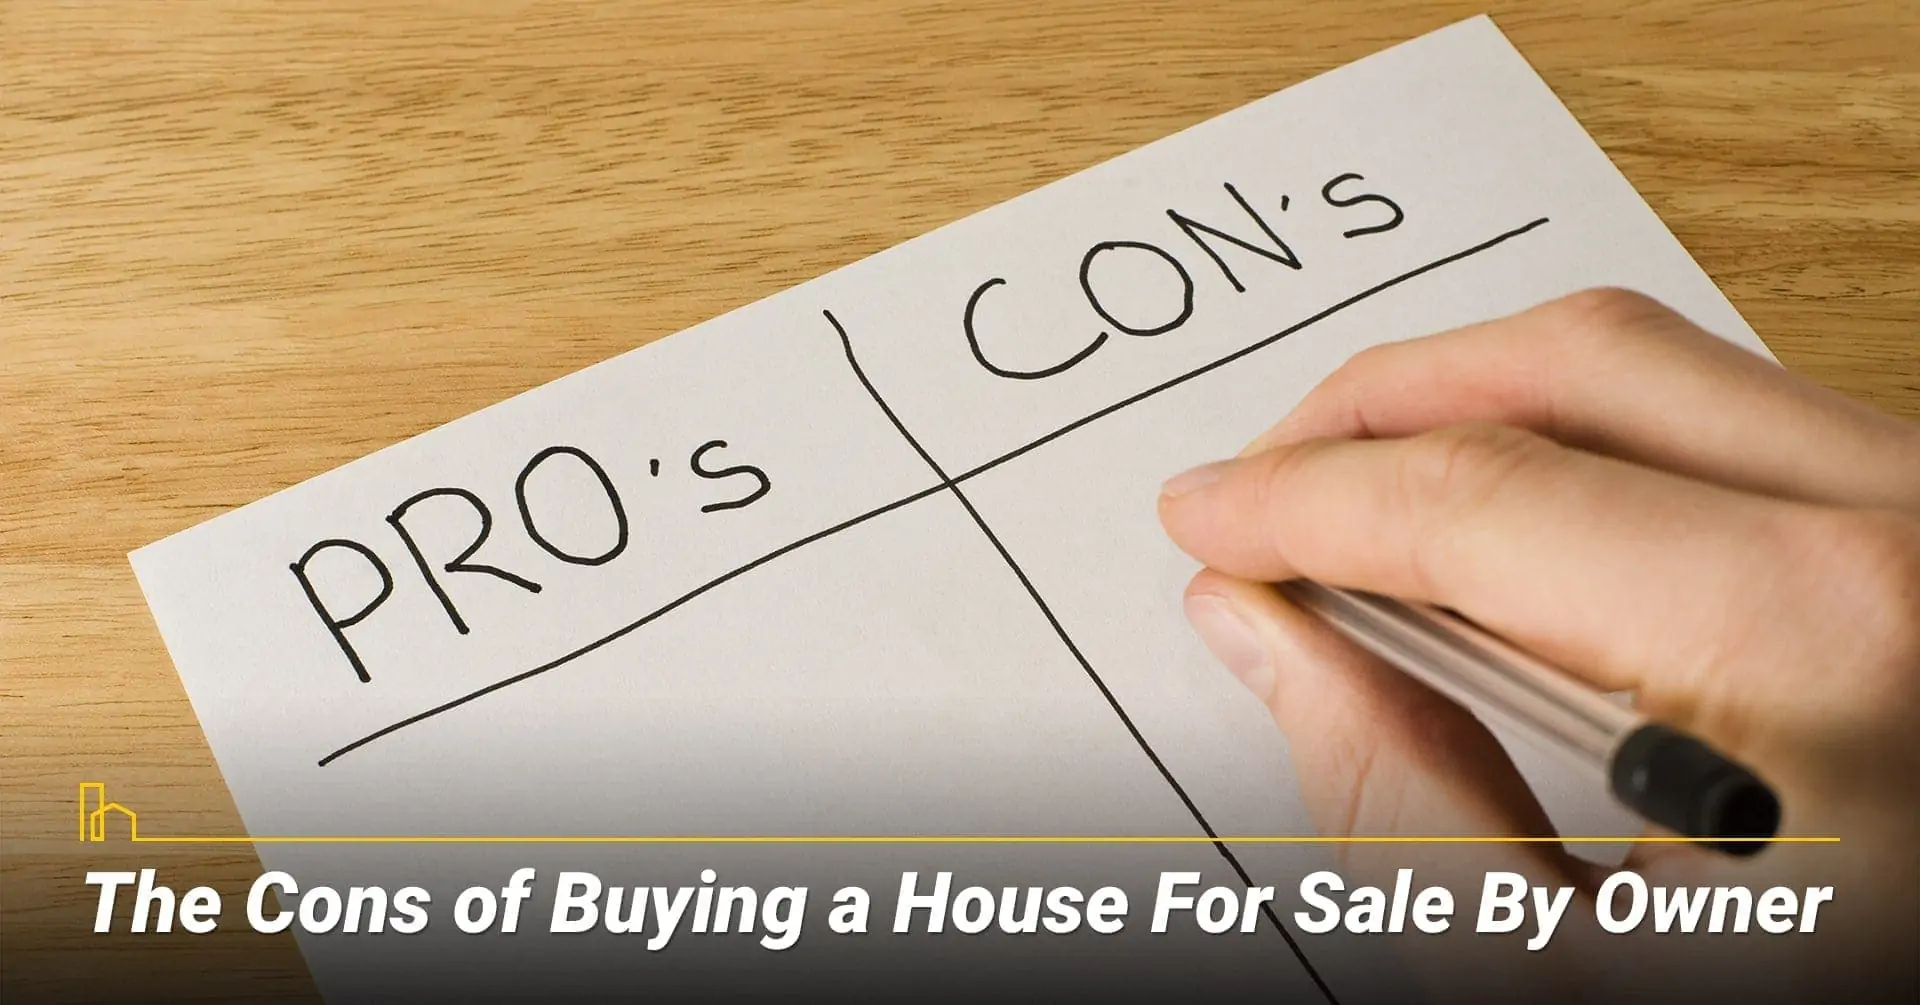 The Cons of Buying a House For Sale By Owner, the disadvantages of buying sale buy owner home